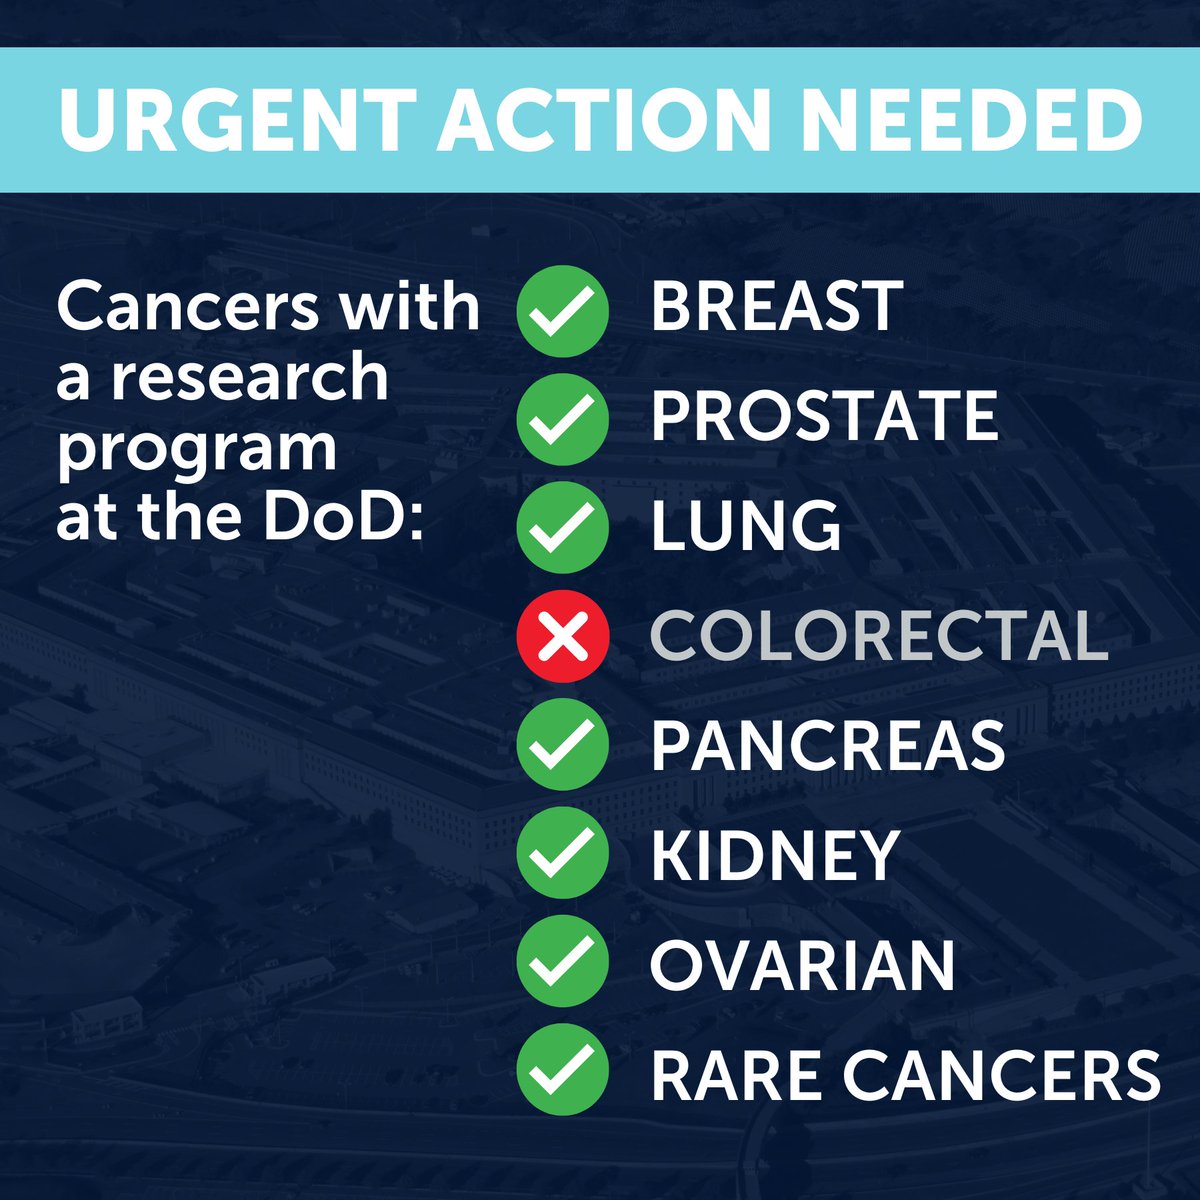 The CDMRP is a Department of Defense (DoD) program that receives congressional appropriations for biomedical research focused on congressionally identified health matters. The CDMRP program provides dedicated research support for eight forms of cancer, but not colorectal cancer.